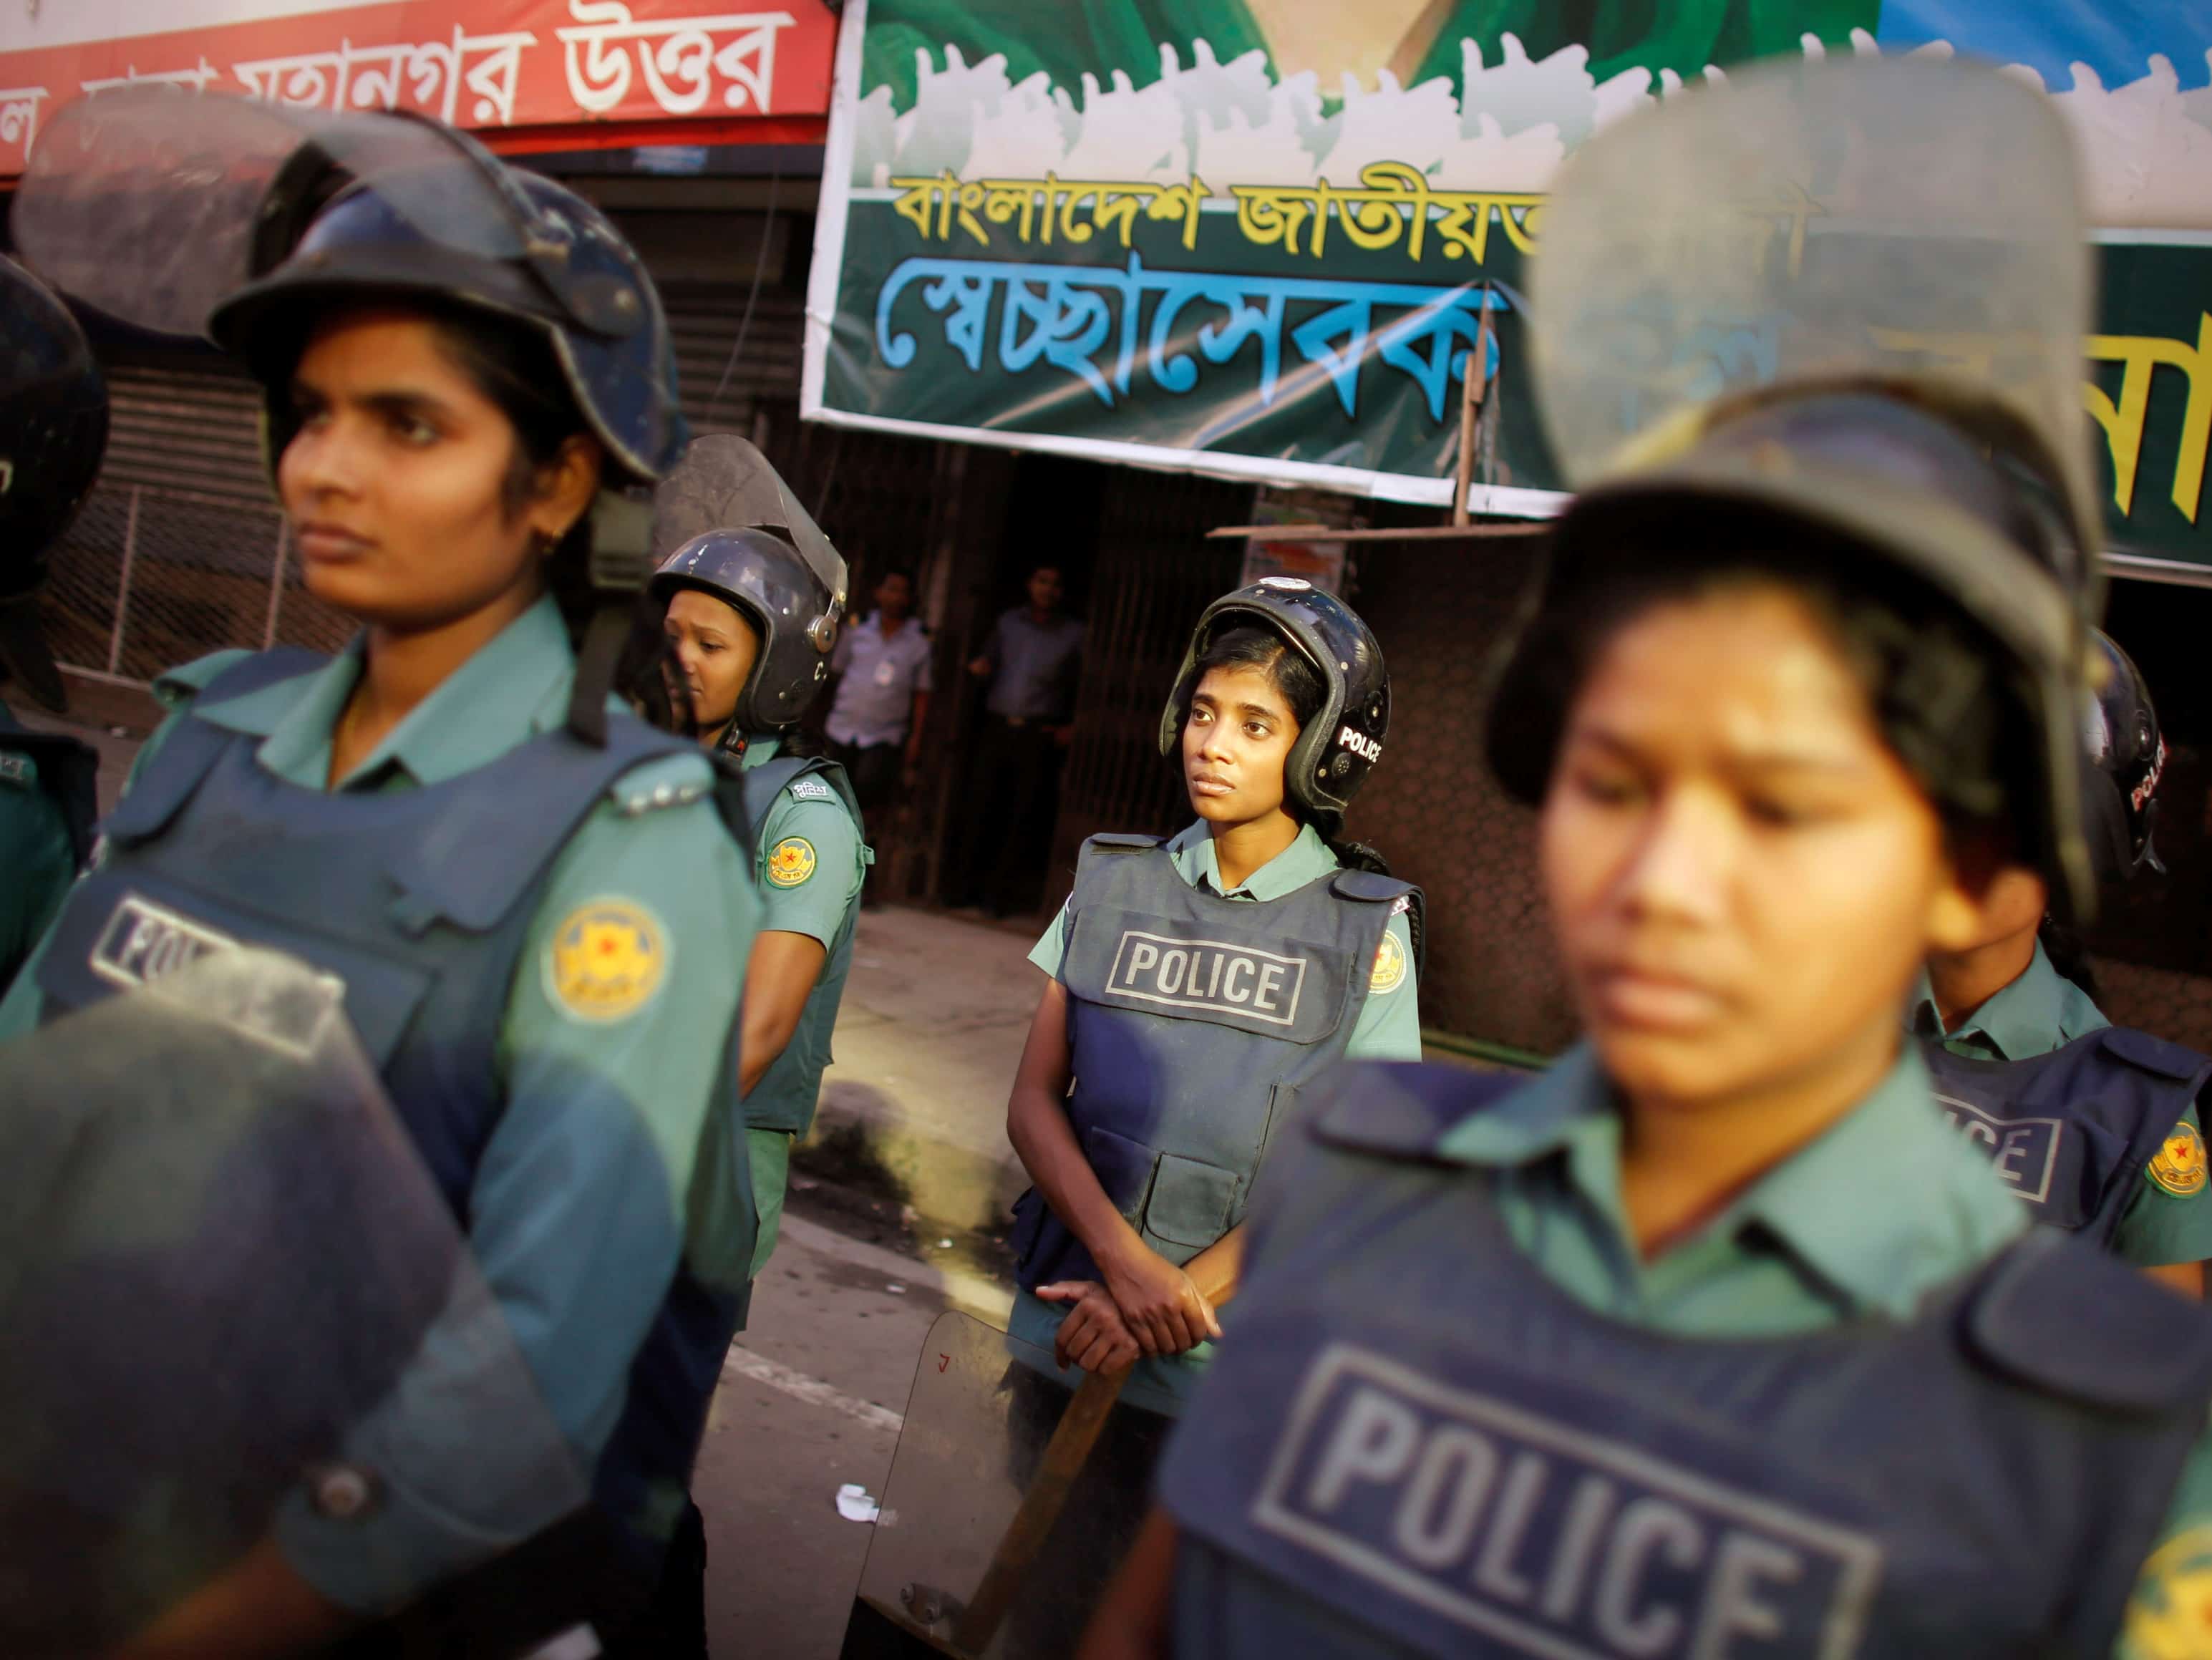 Police officers stand guard in front of the office of the Bangladesh Nationalist Party (BNP) during a strike in Dhaka, 28 October 2013, REUTERS/Andrew Biraj